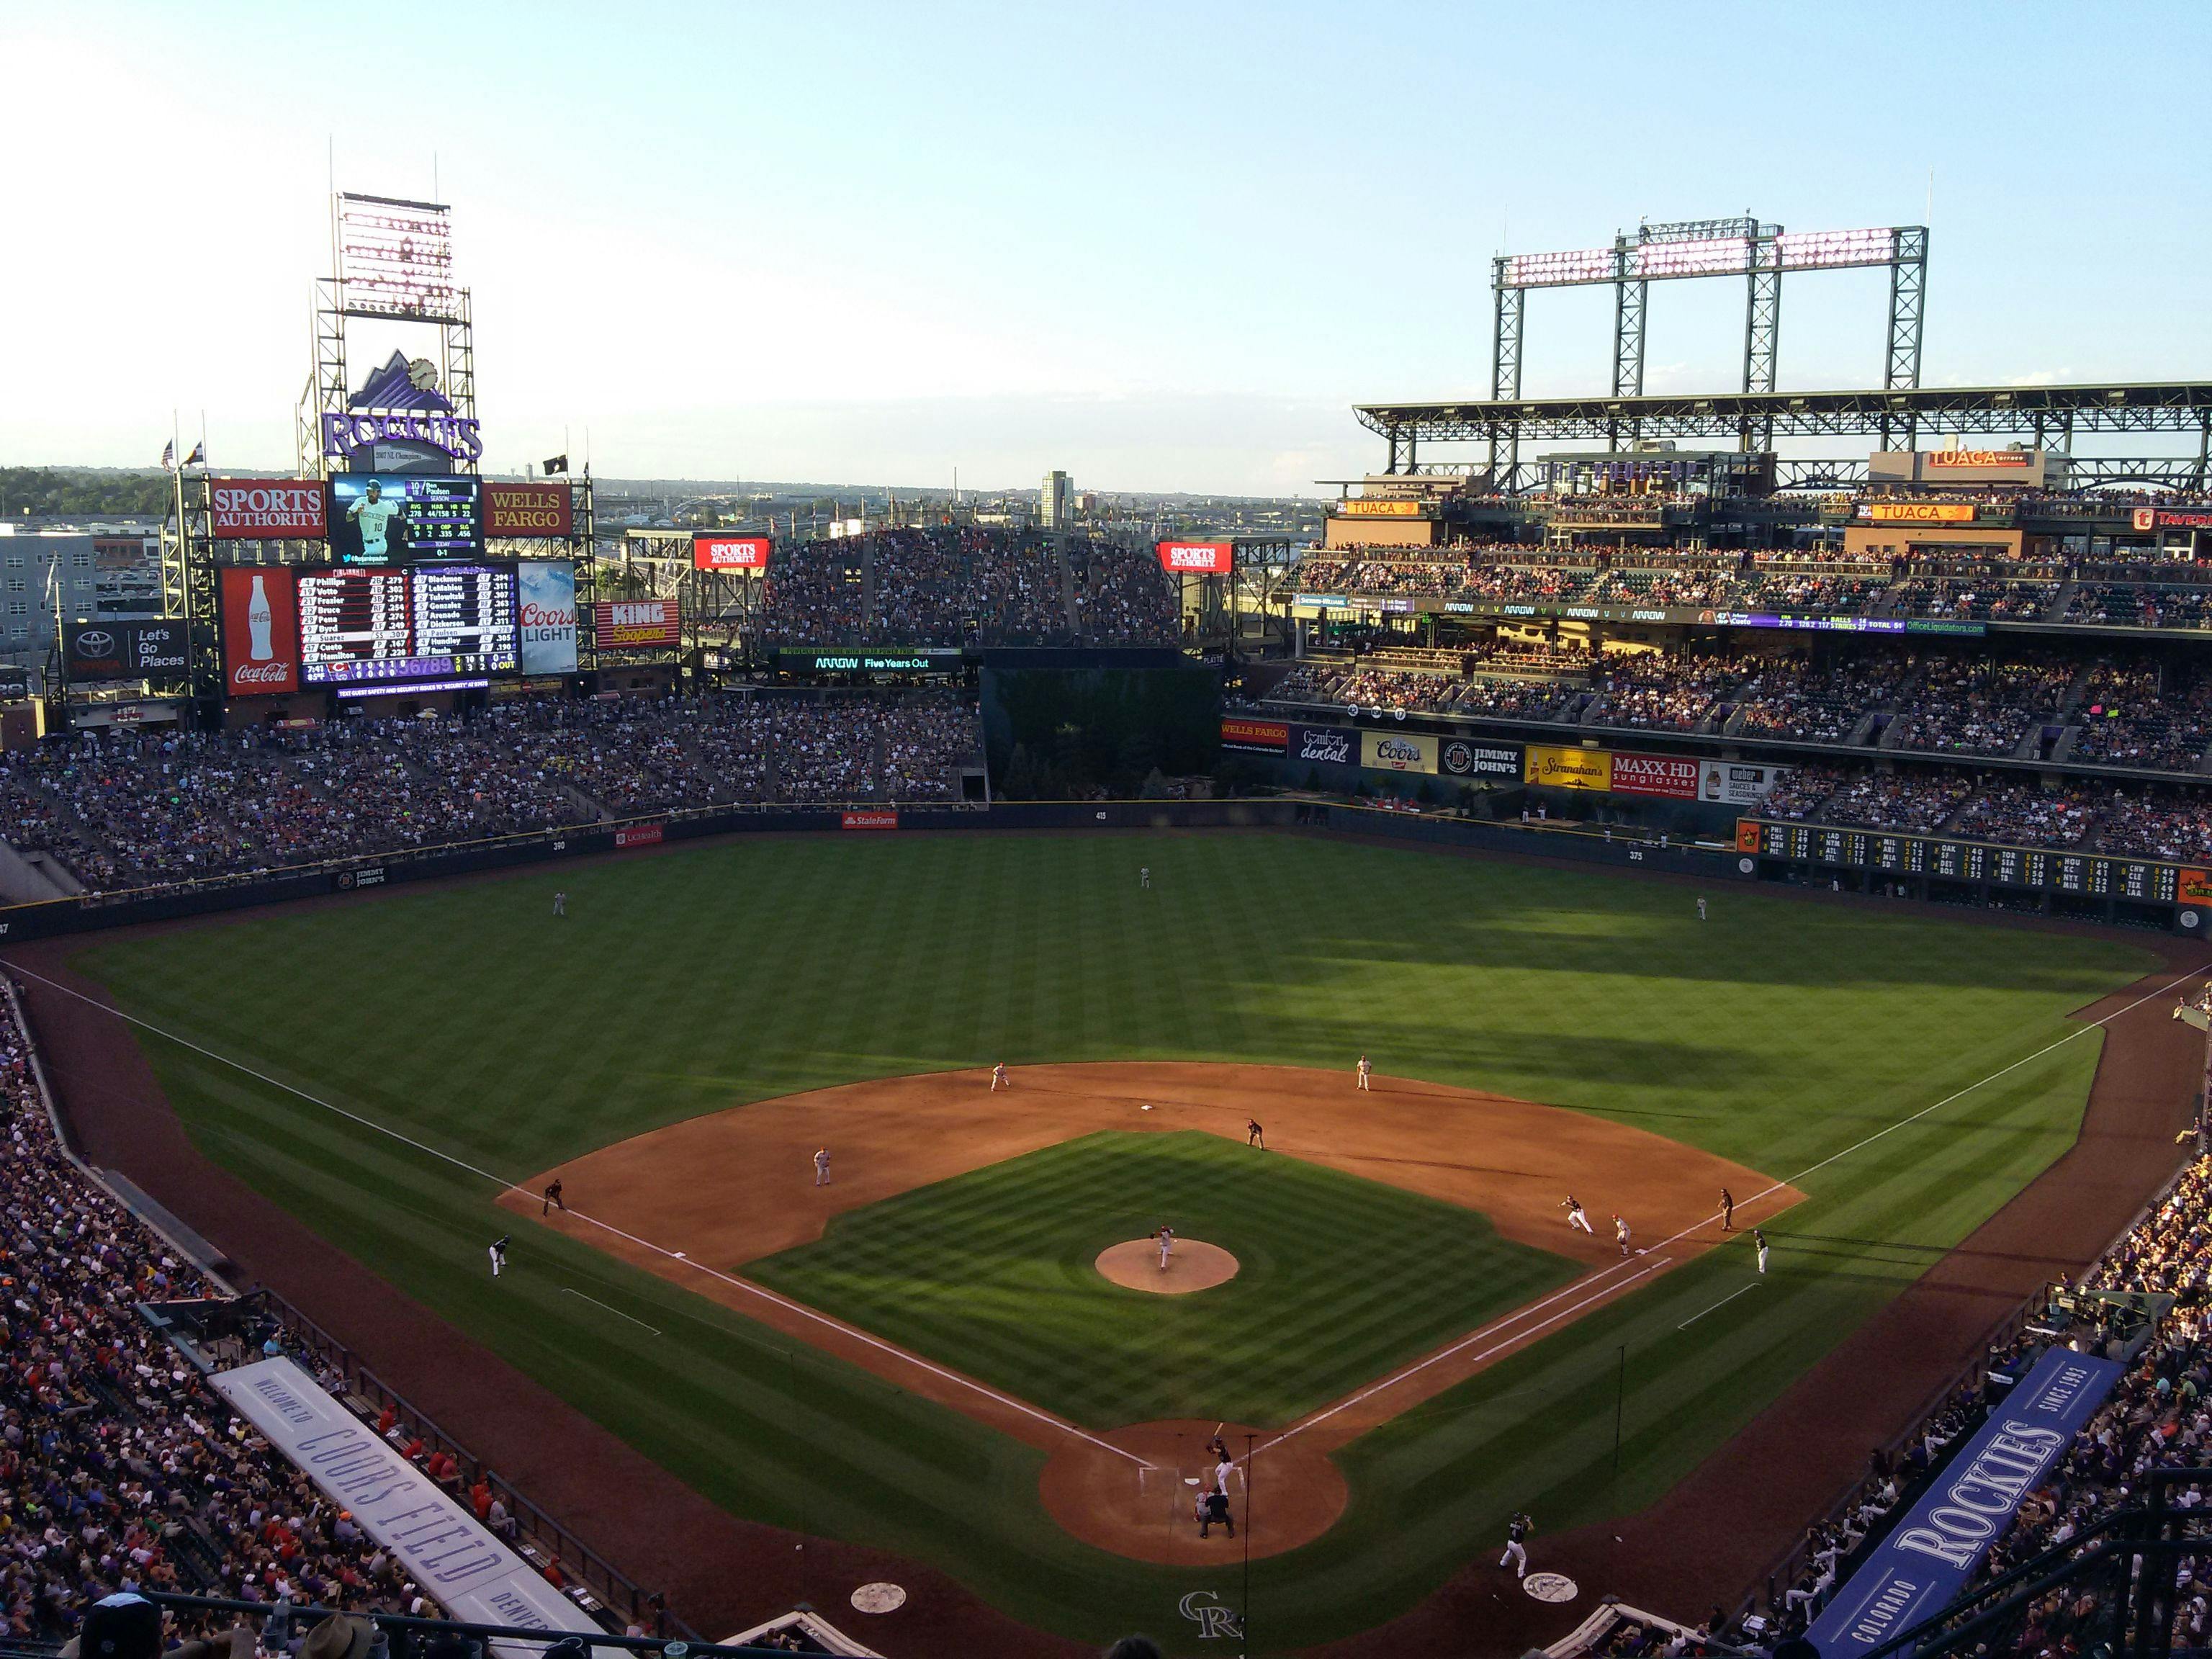 3 Things You Need To Eat At Coors Field